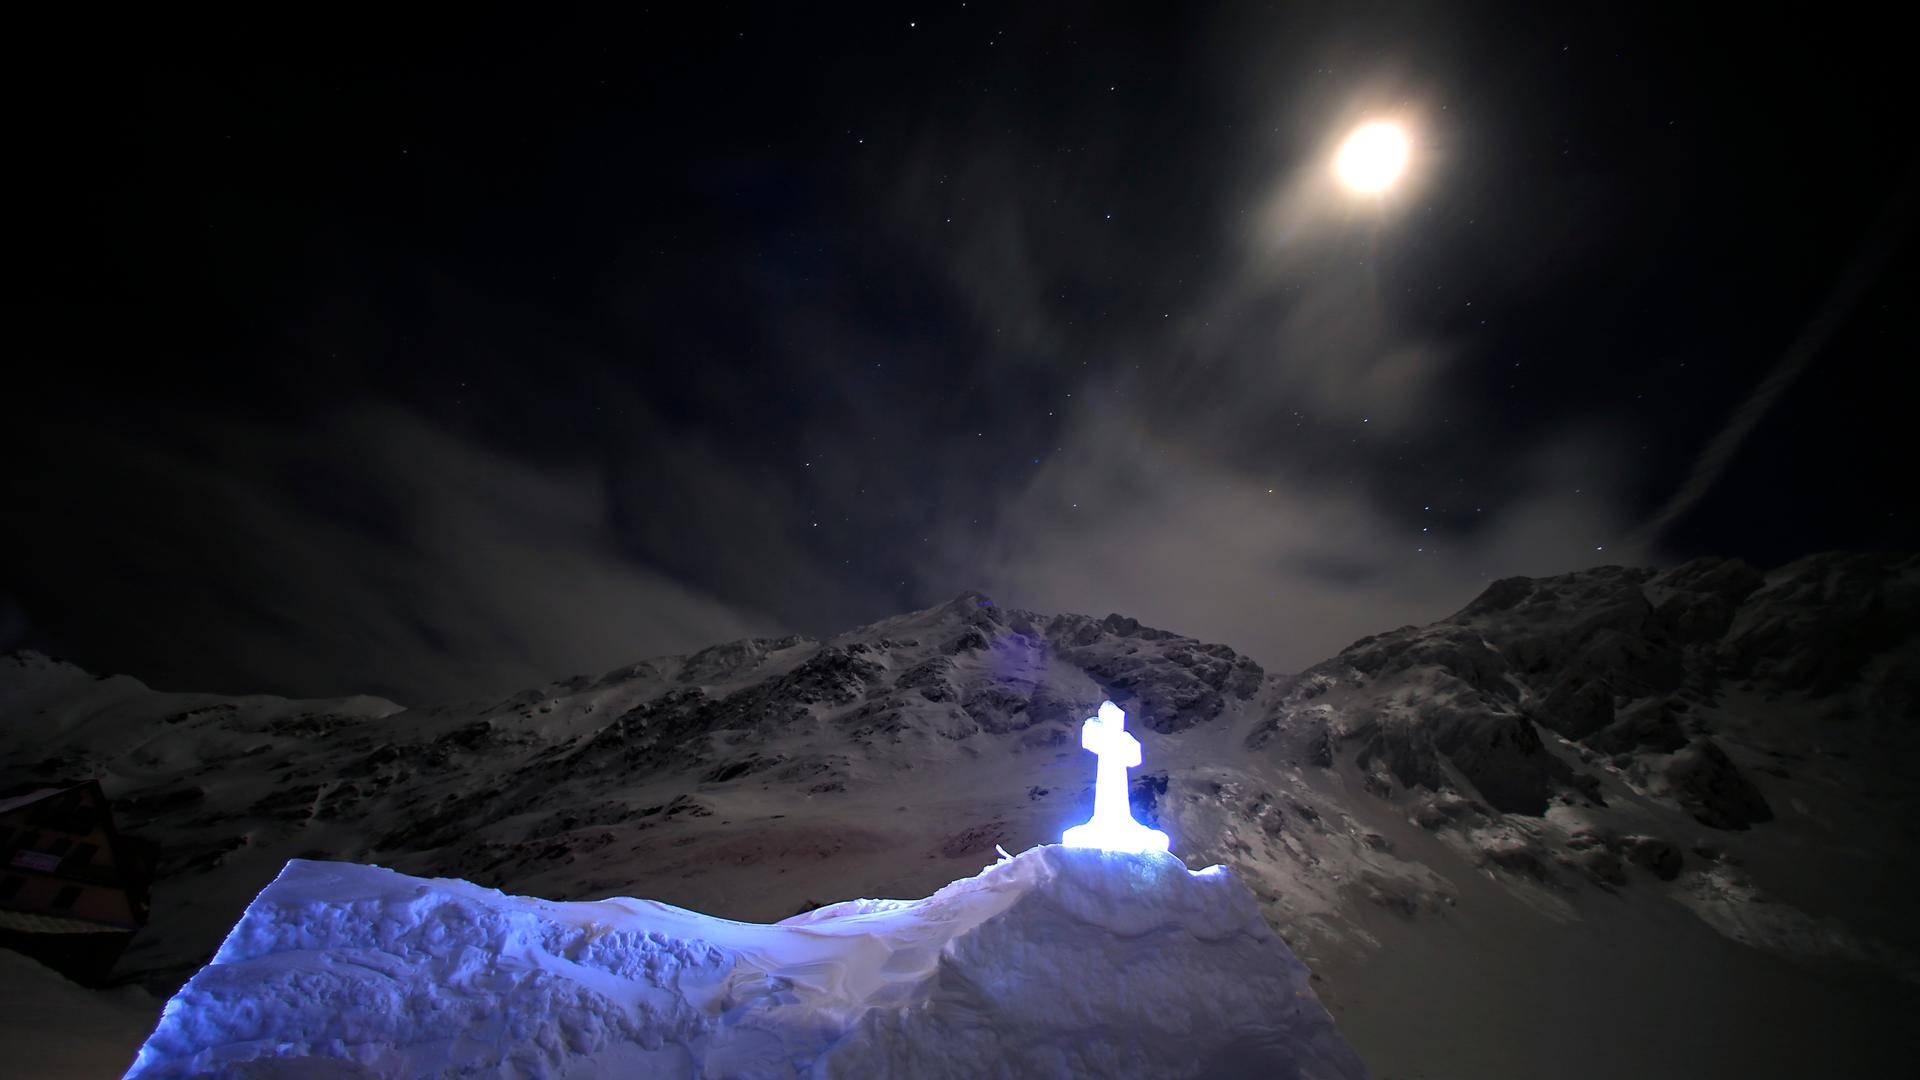 A church made entirely from ice is seen during the night at Balea Lac resort in the Fagaras mountains.